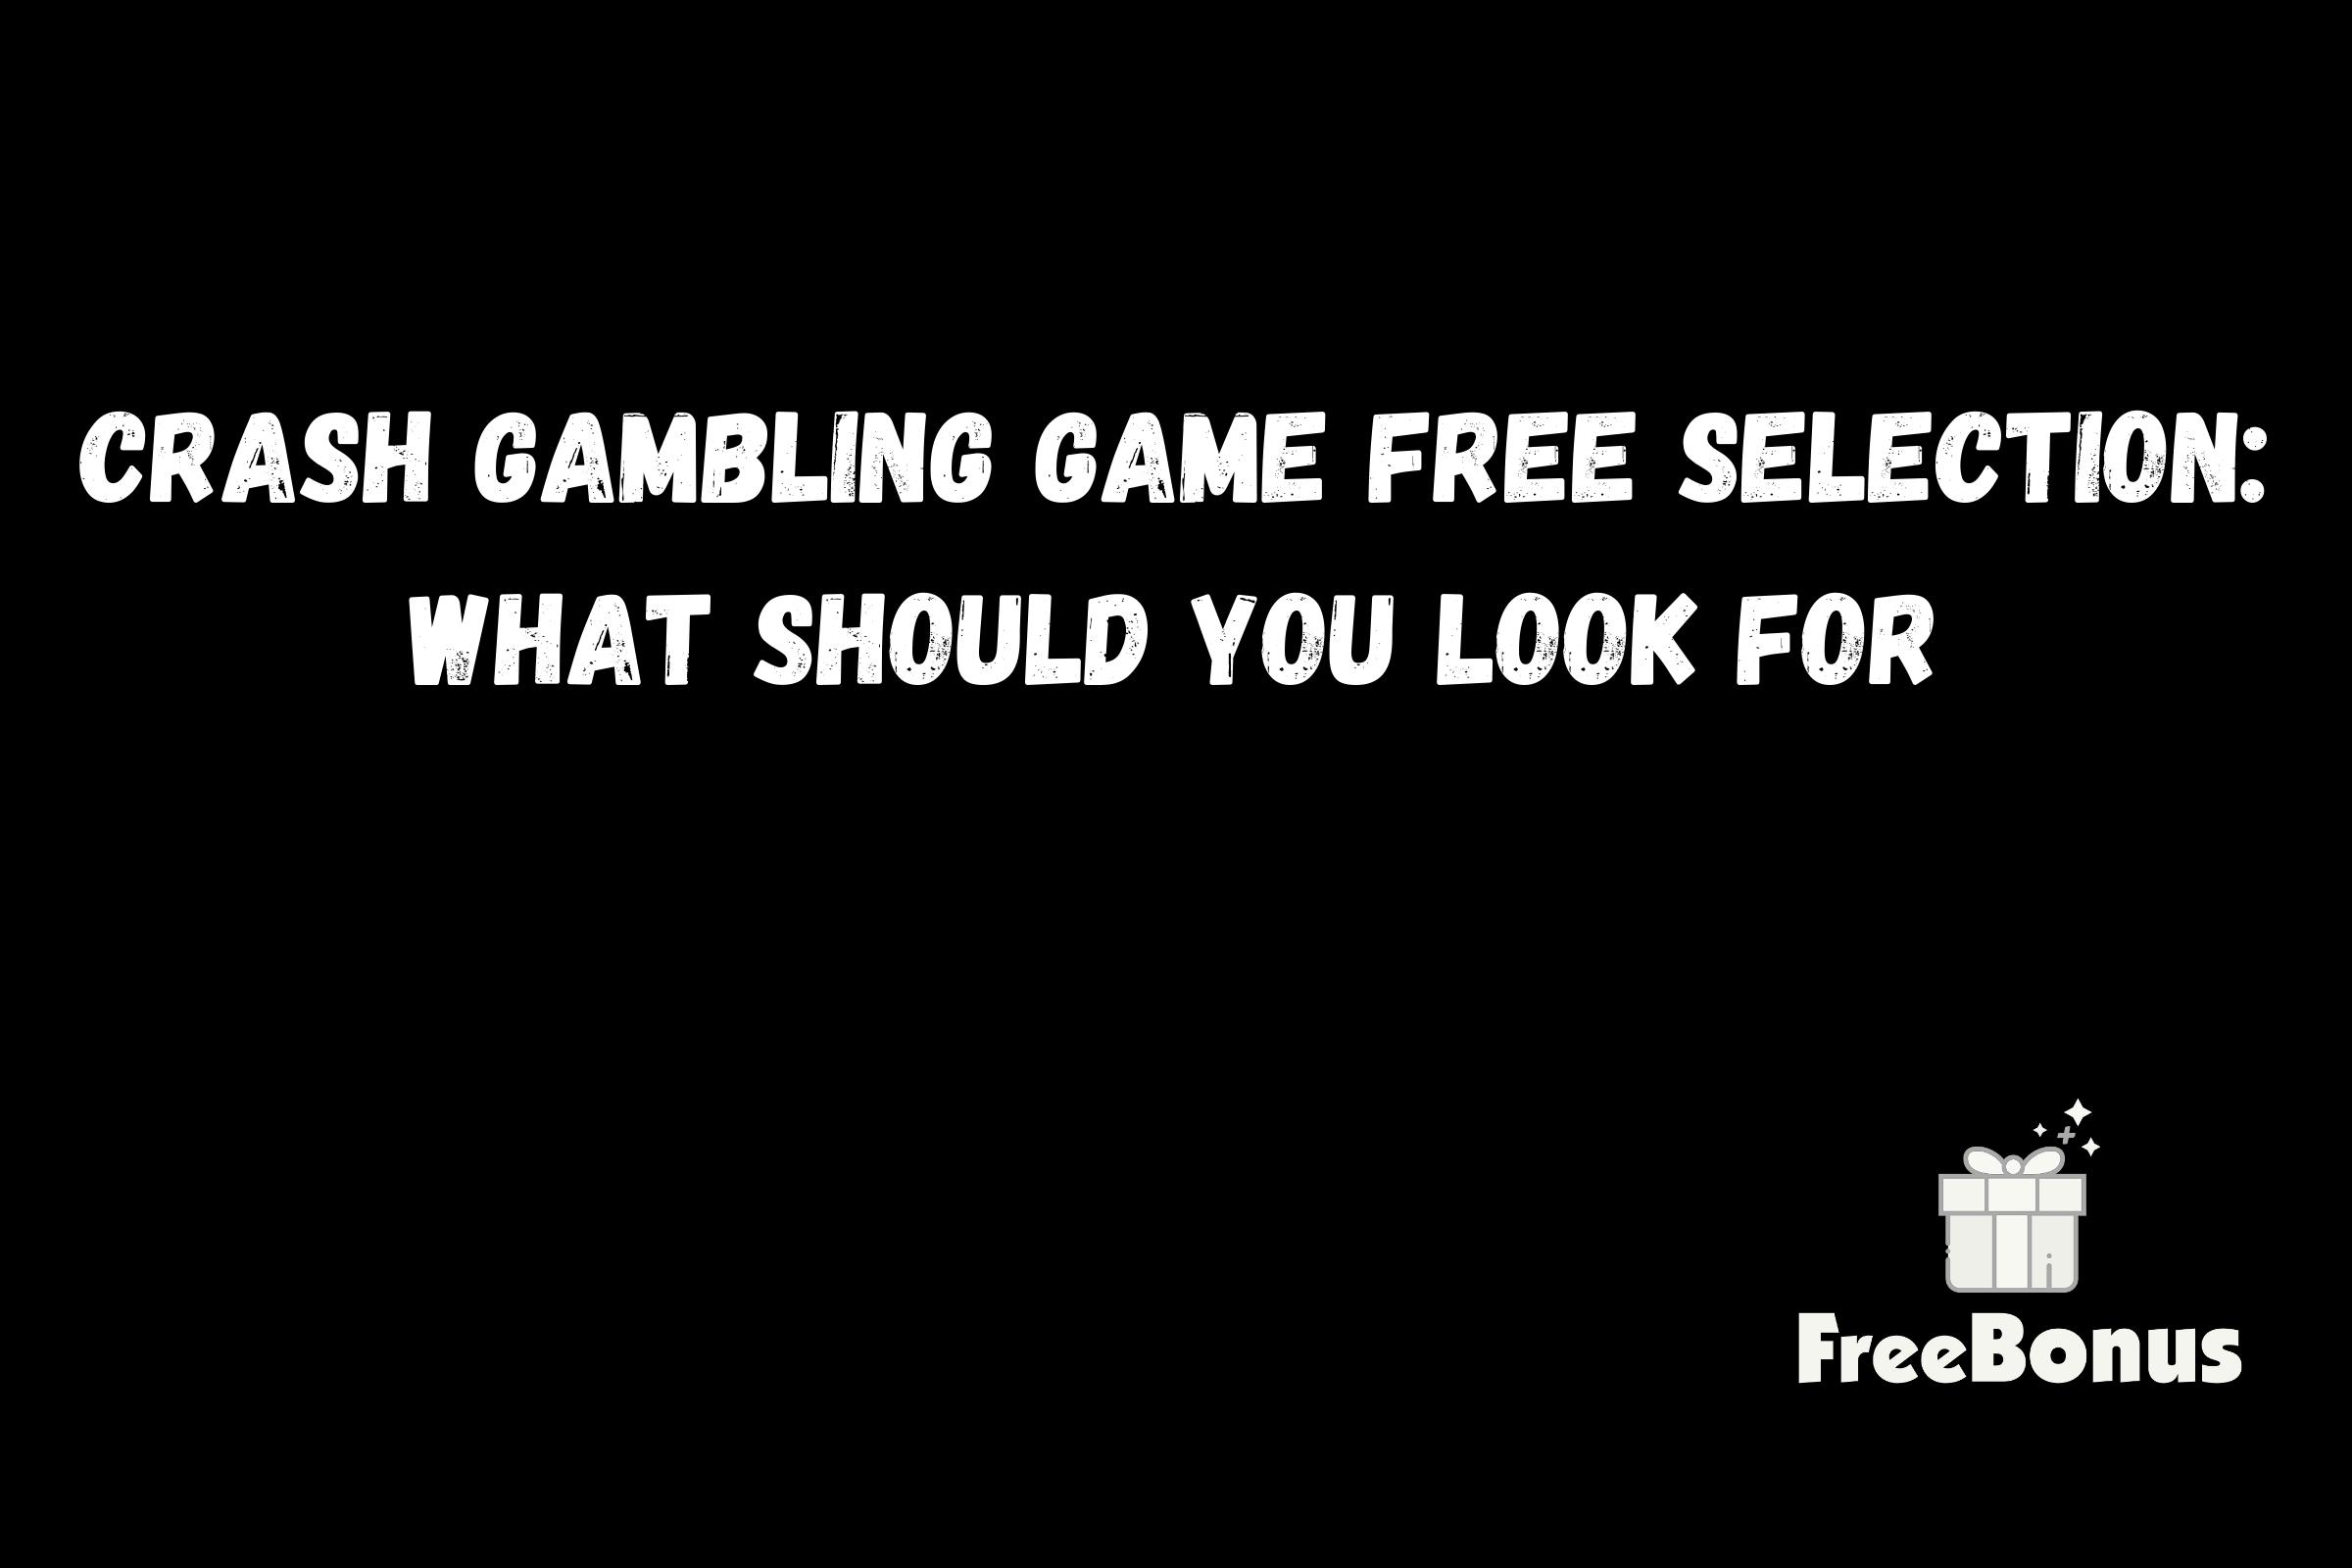 Crash Gambling Game Free Selection: What Should You Look For